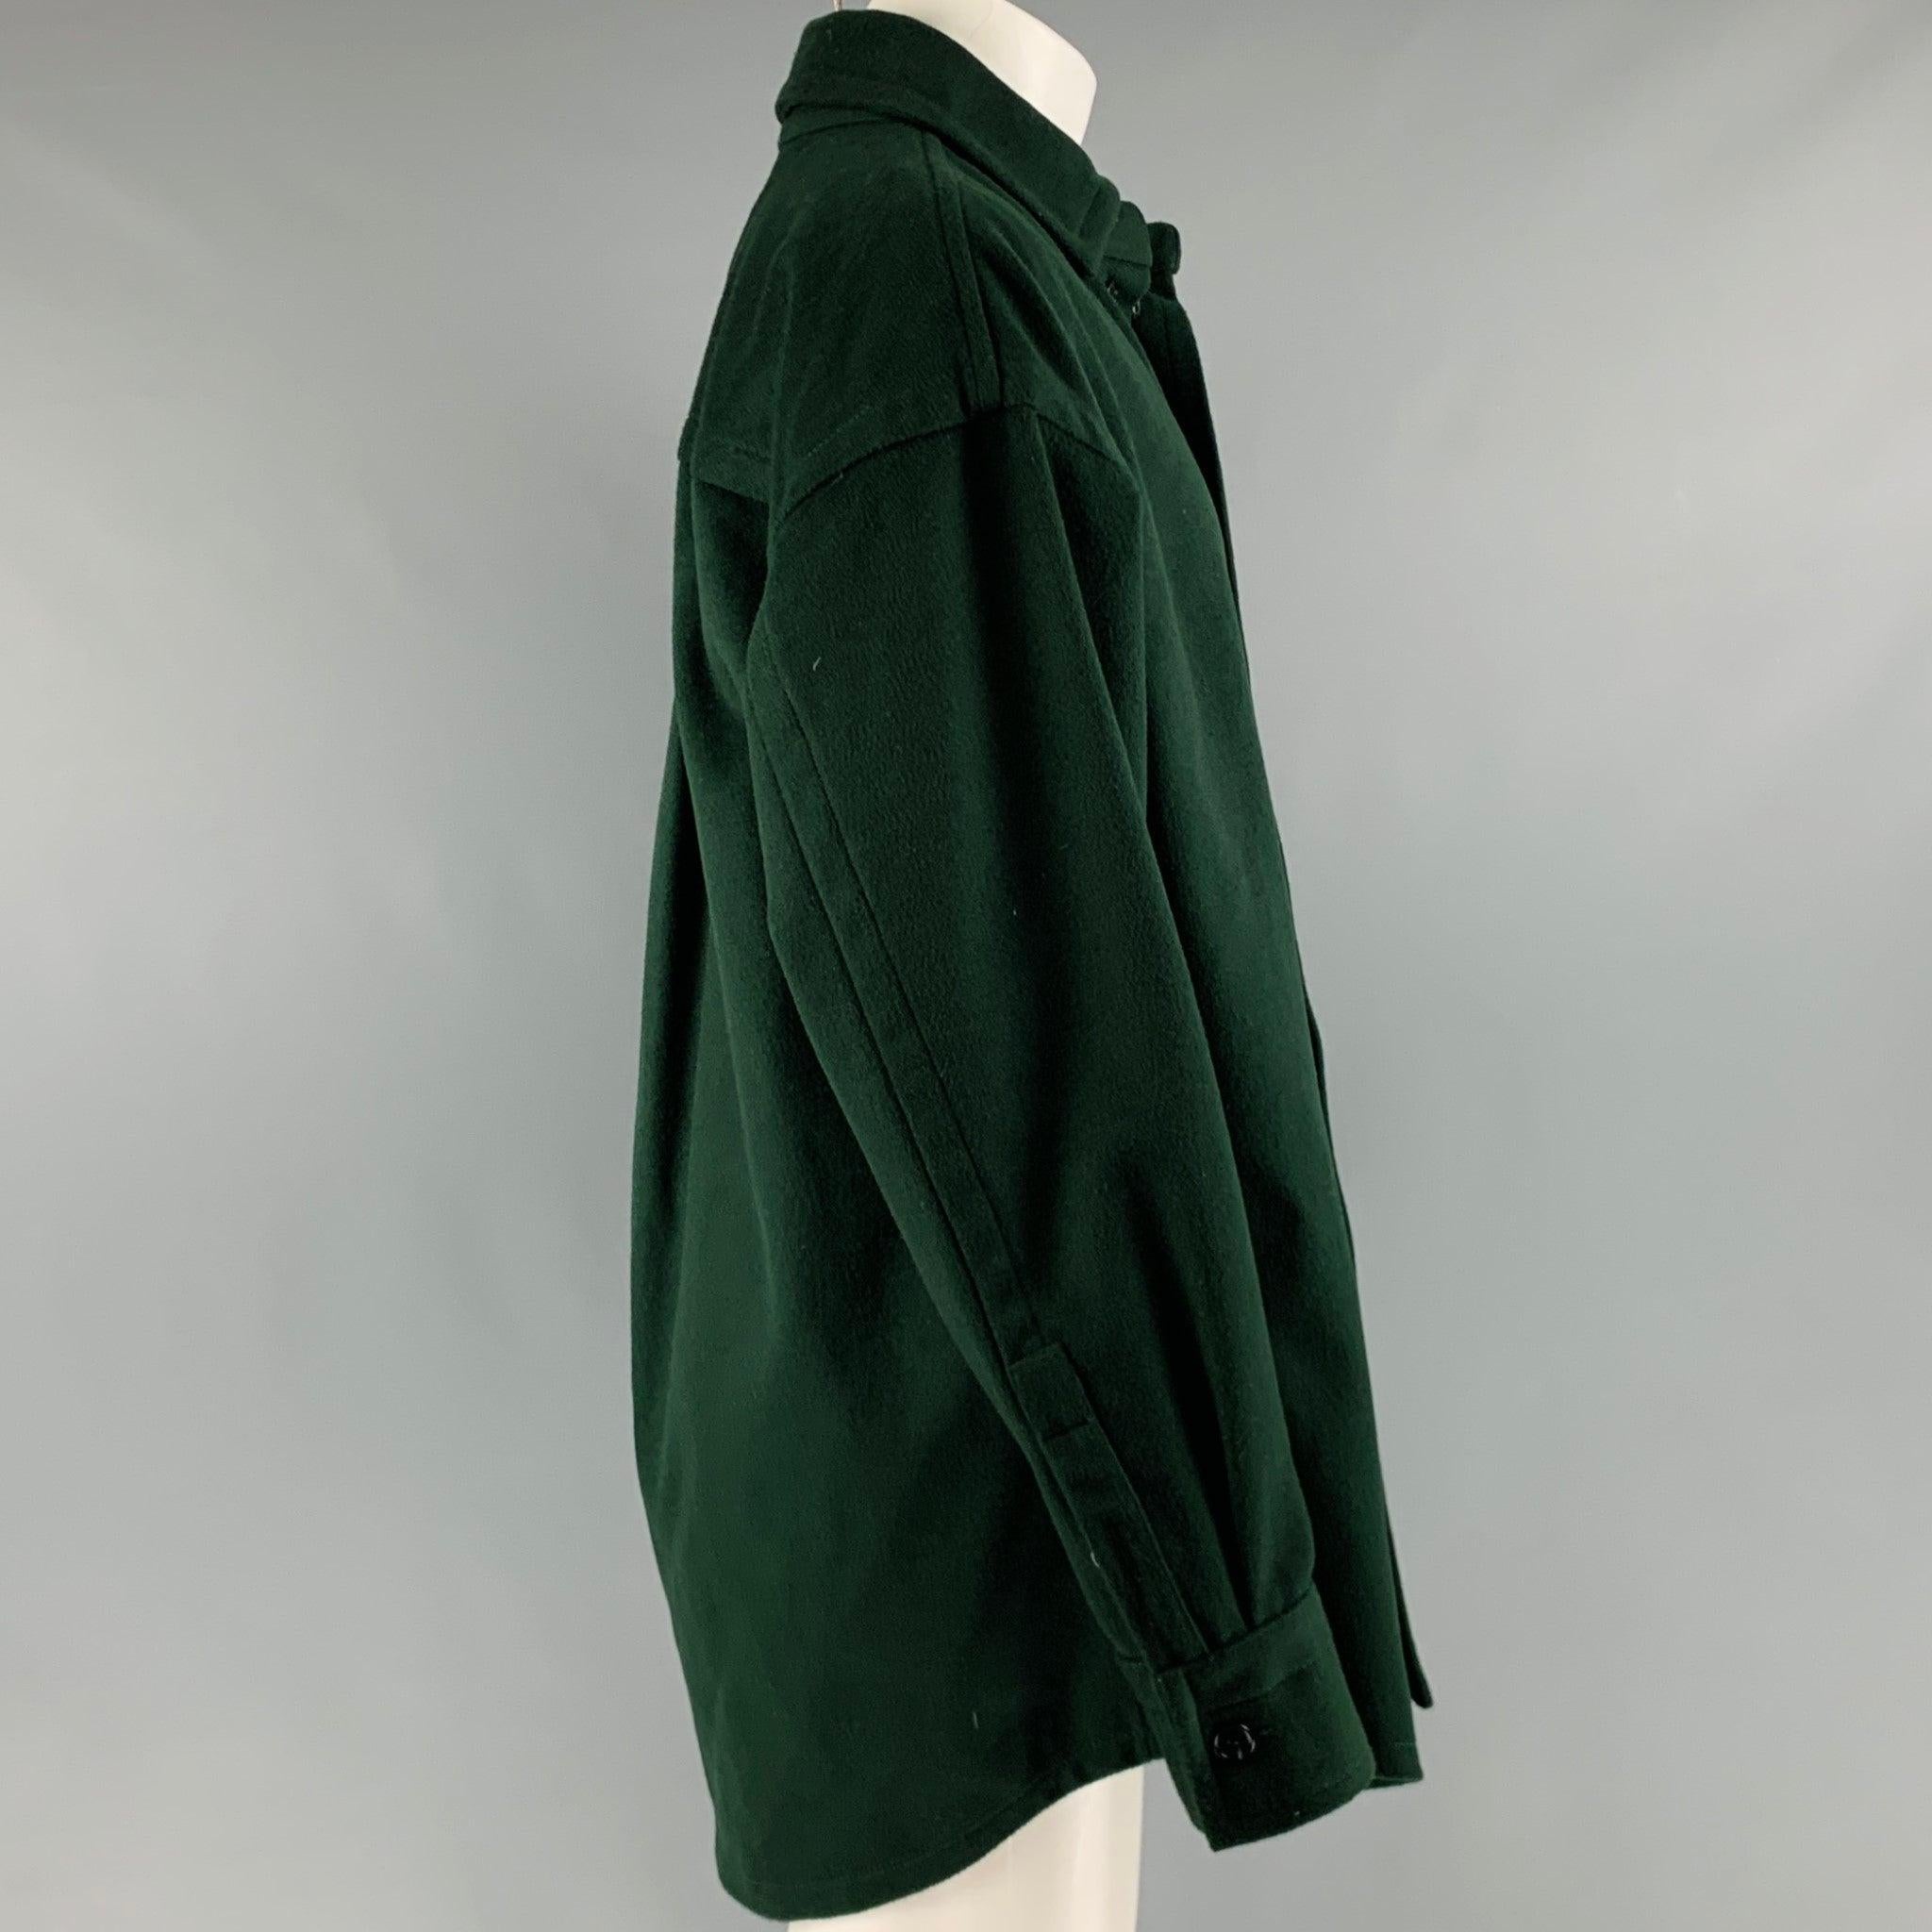 HUSSEIN CHALAYAN long sleeve shirt
in a forest green wool blend fabric featuring one patch pocket, spread collar, and button closure. Made in Italy.Excellent Pre-Owned Condition. 

Marked:   48 

Measurements: 
 
Shoulder: 24 inches Chest: 50 inches